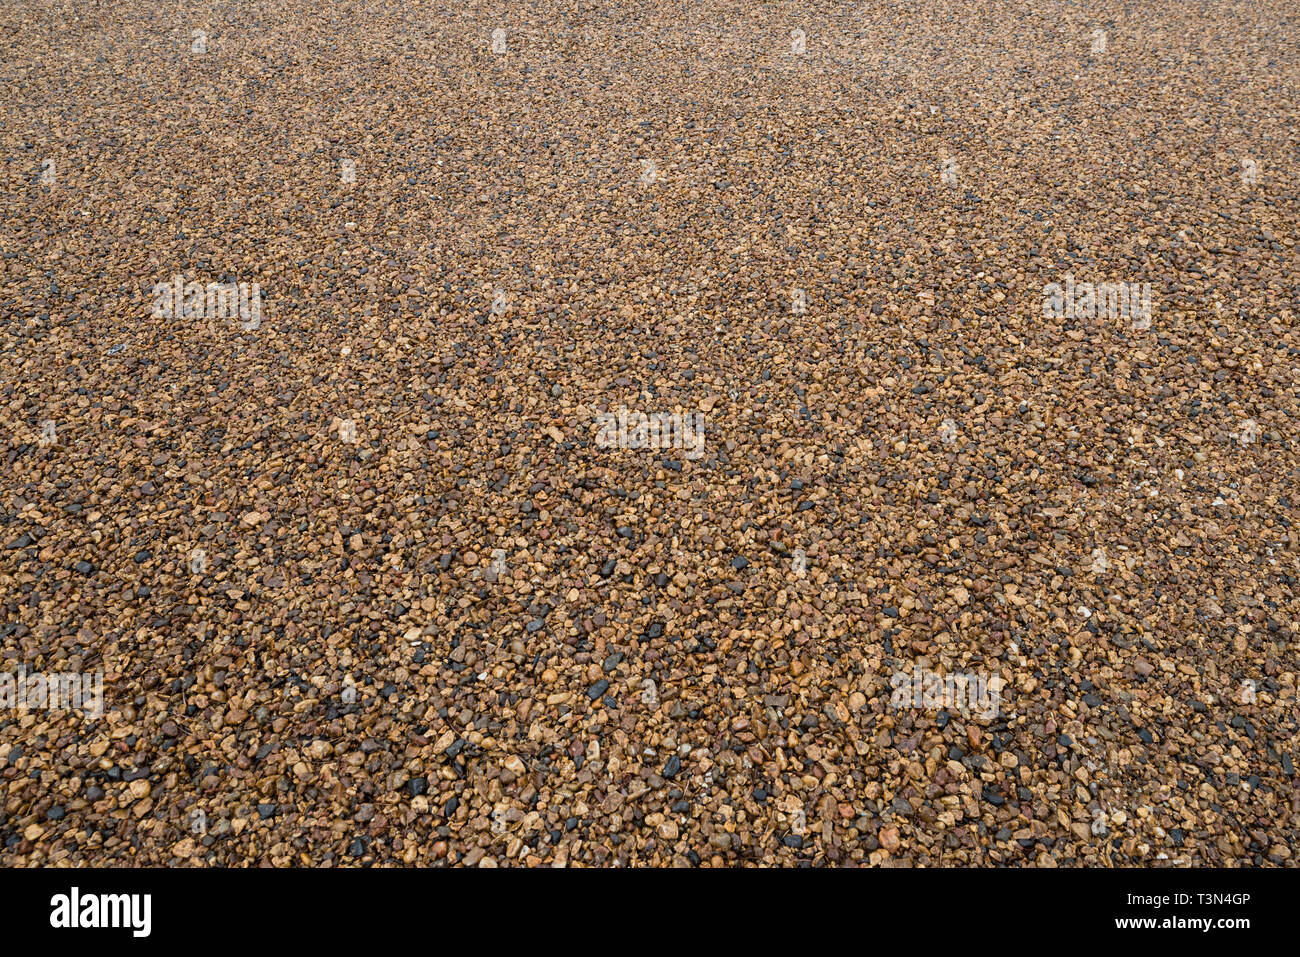 Background of fine gravel or crushed stone in perspective. Stock Photo